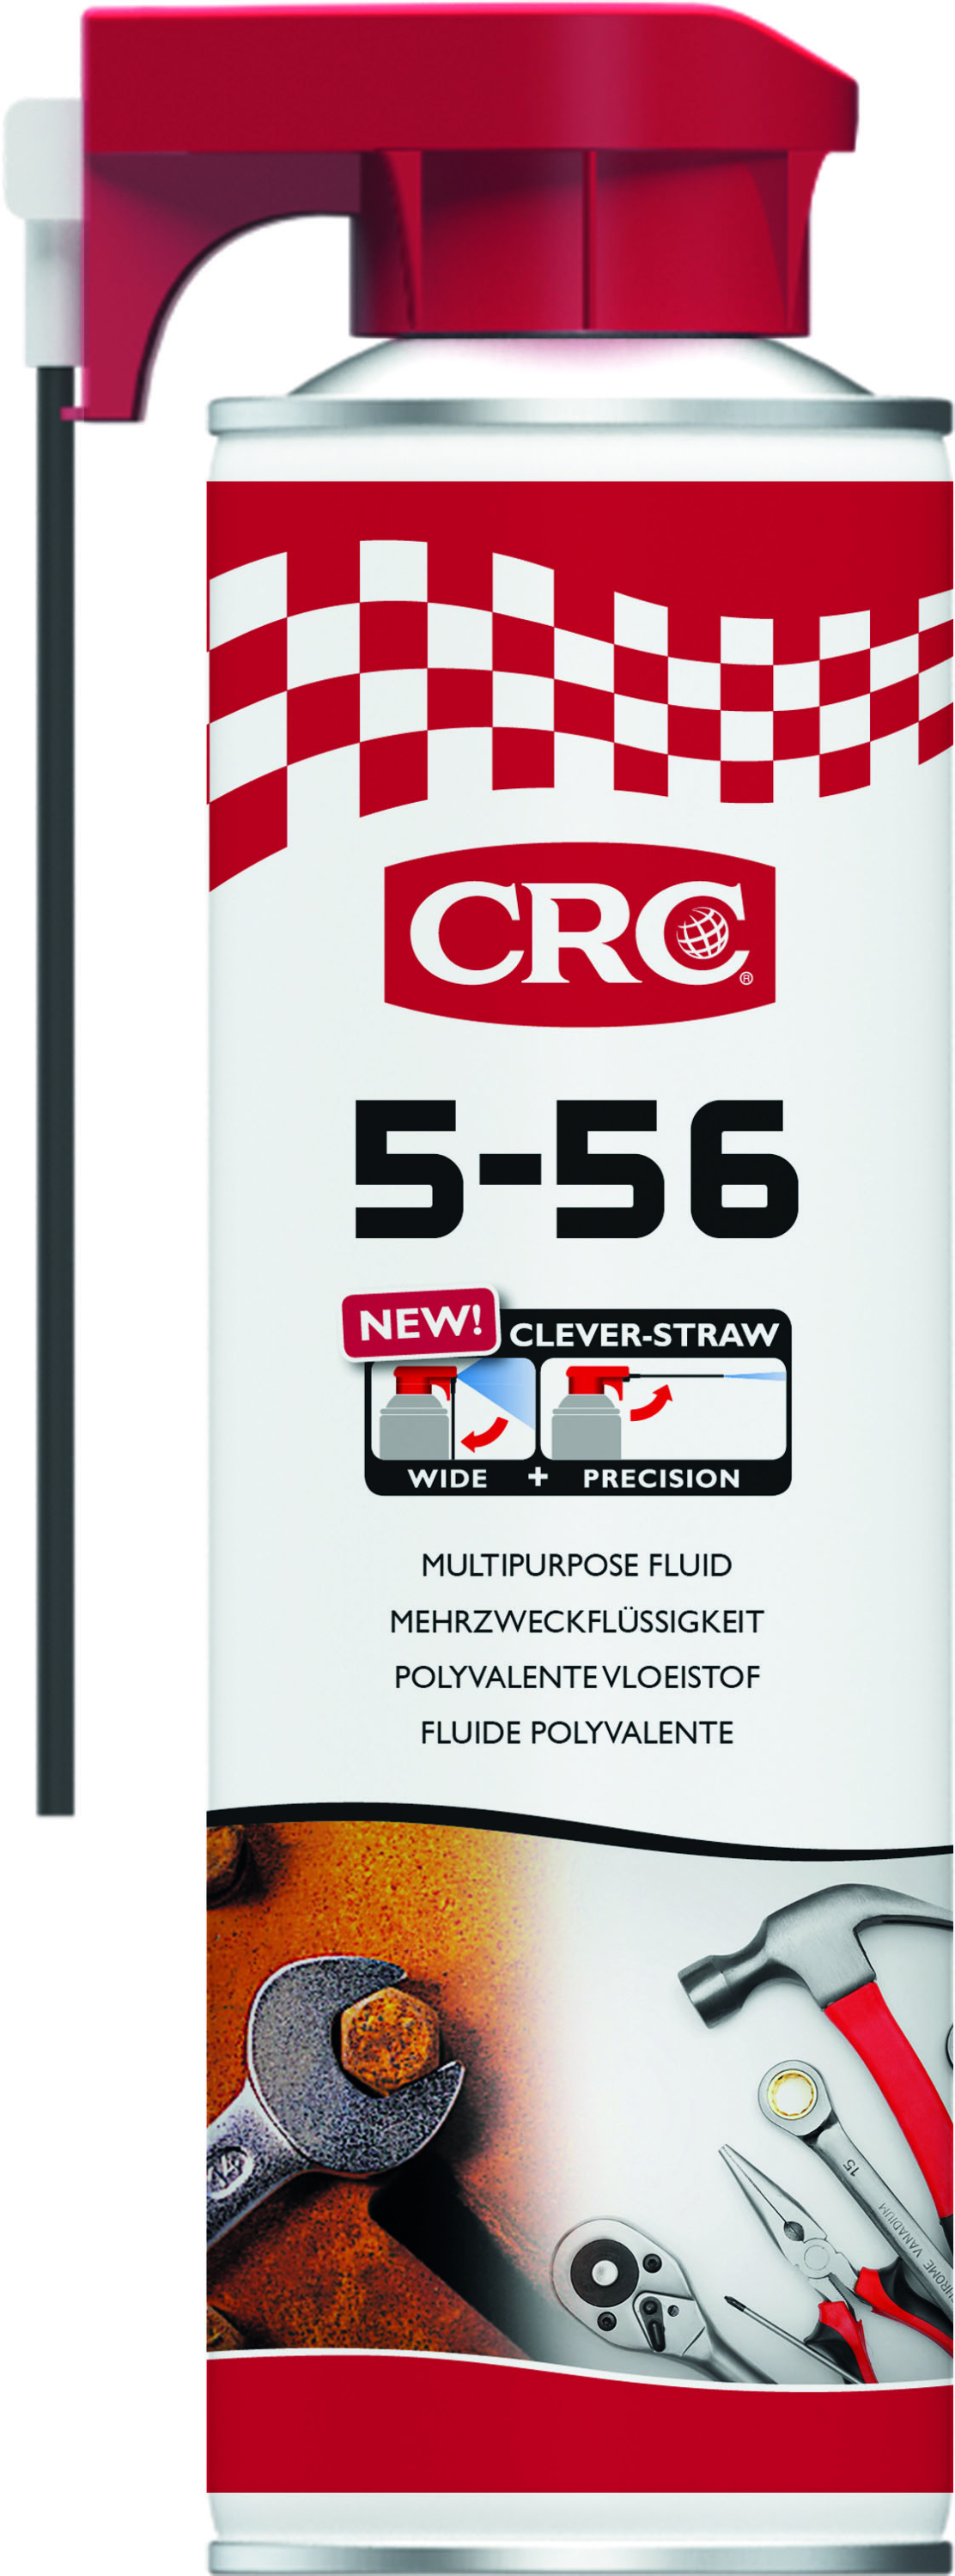 5-56 crc clever straw 250 ml